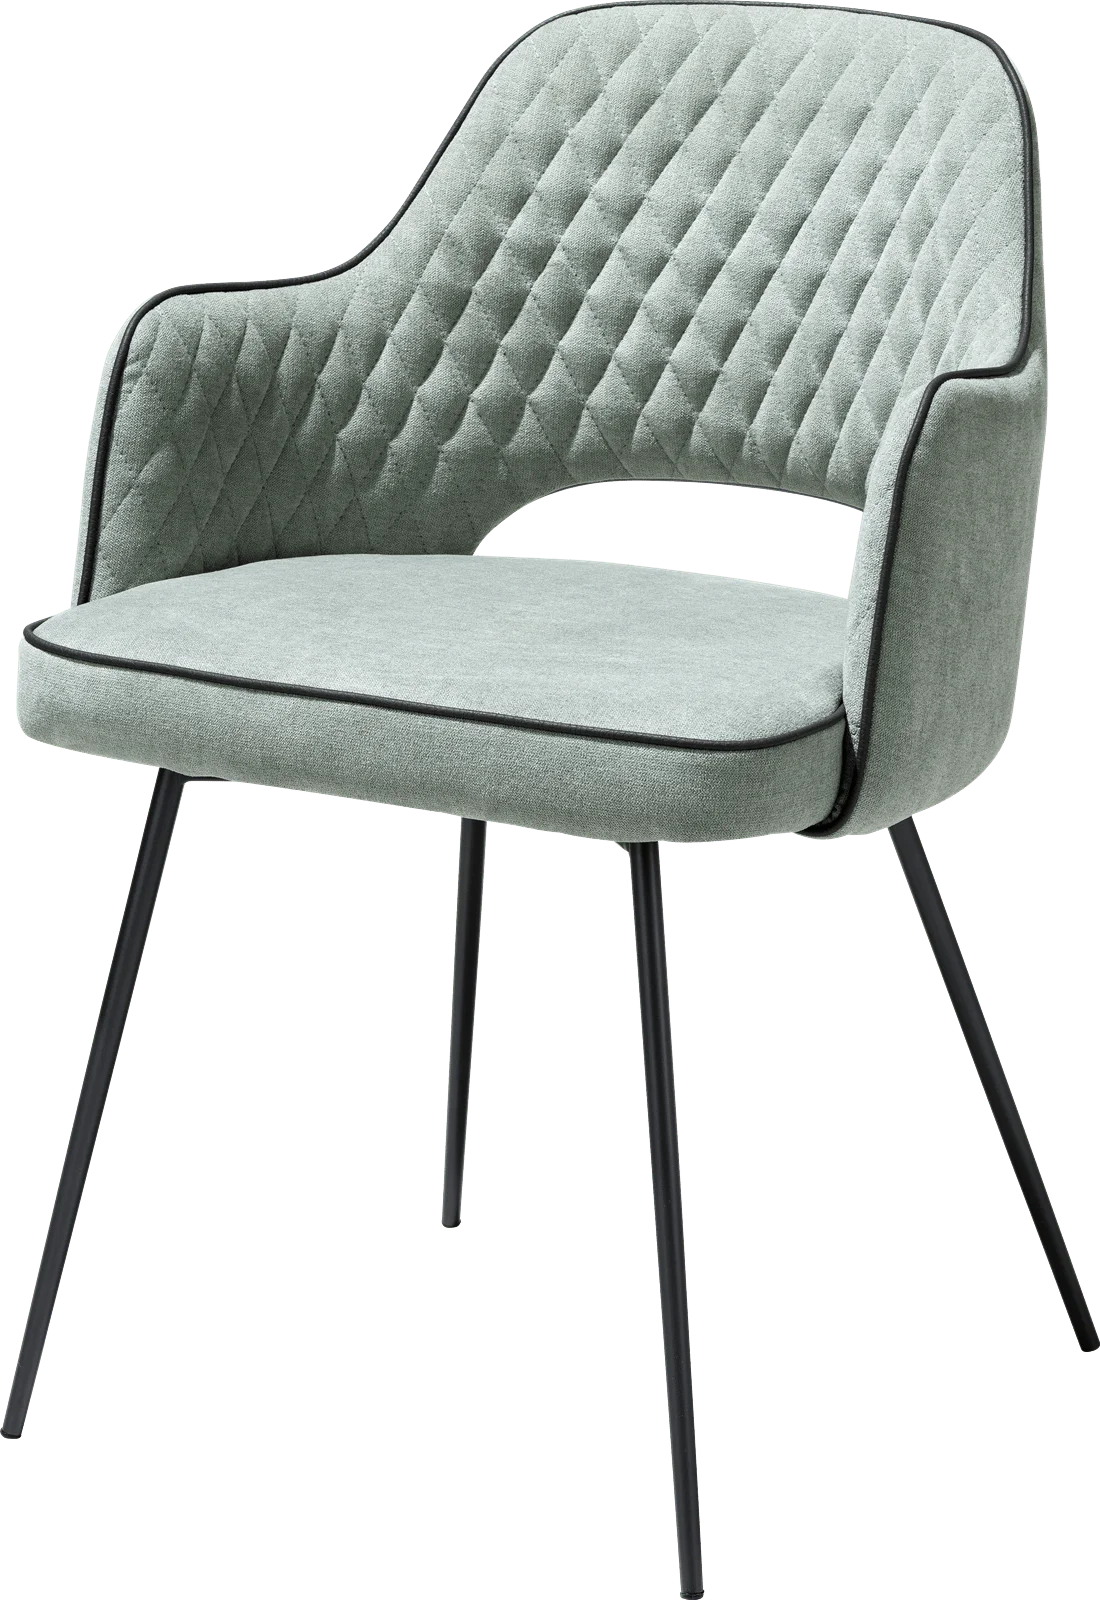 Fashion High Quality Diamond Pattern Elegant Fabric Dining Chair With Arm Rest